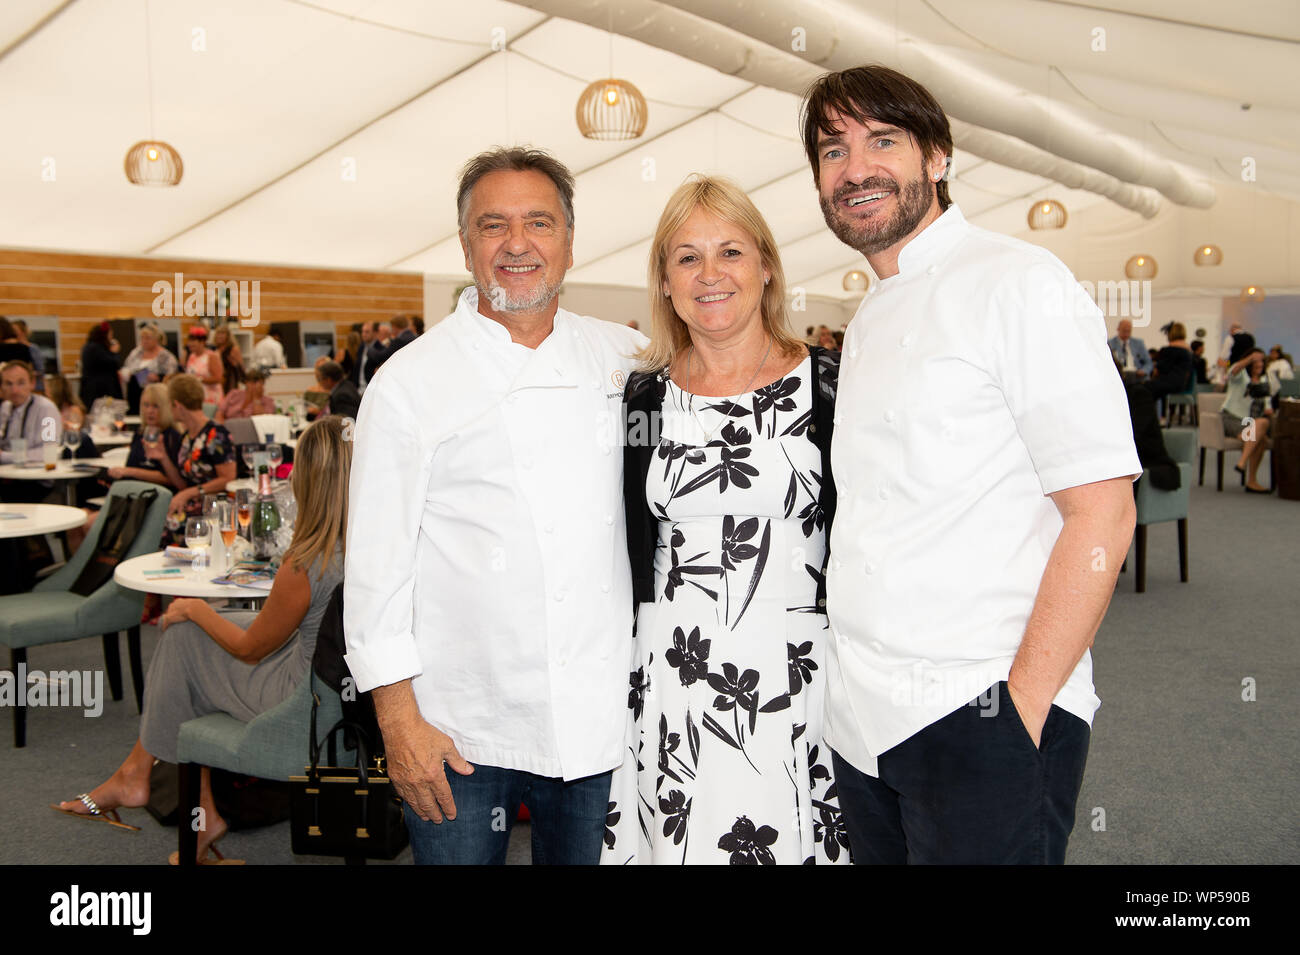 Italian Tourist Board Festival of Food and Wine, Ascot Racecourse, Ascot, Berkshire, UK. 7th Sep, 2019. Janette Garden from Sandhurst is delighted to have her photo taken with celebrity chef Raymond Blanc OBE and Chef Eric Lanlard from Cake Boy ahead of their cooking demonstrations to racegoers in the Gastronomes Theatre at Ascot Racecourse. Credit: Maureen McLean/Alamy Live News Stock Photo